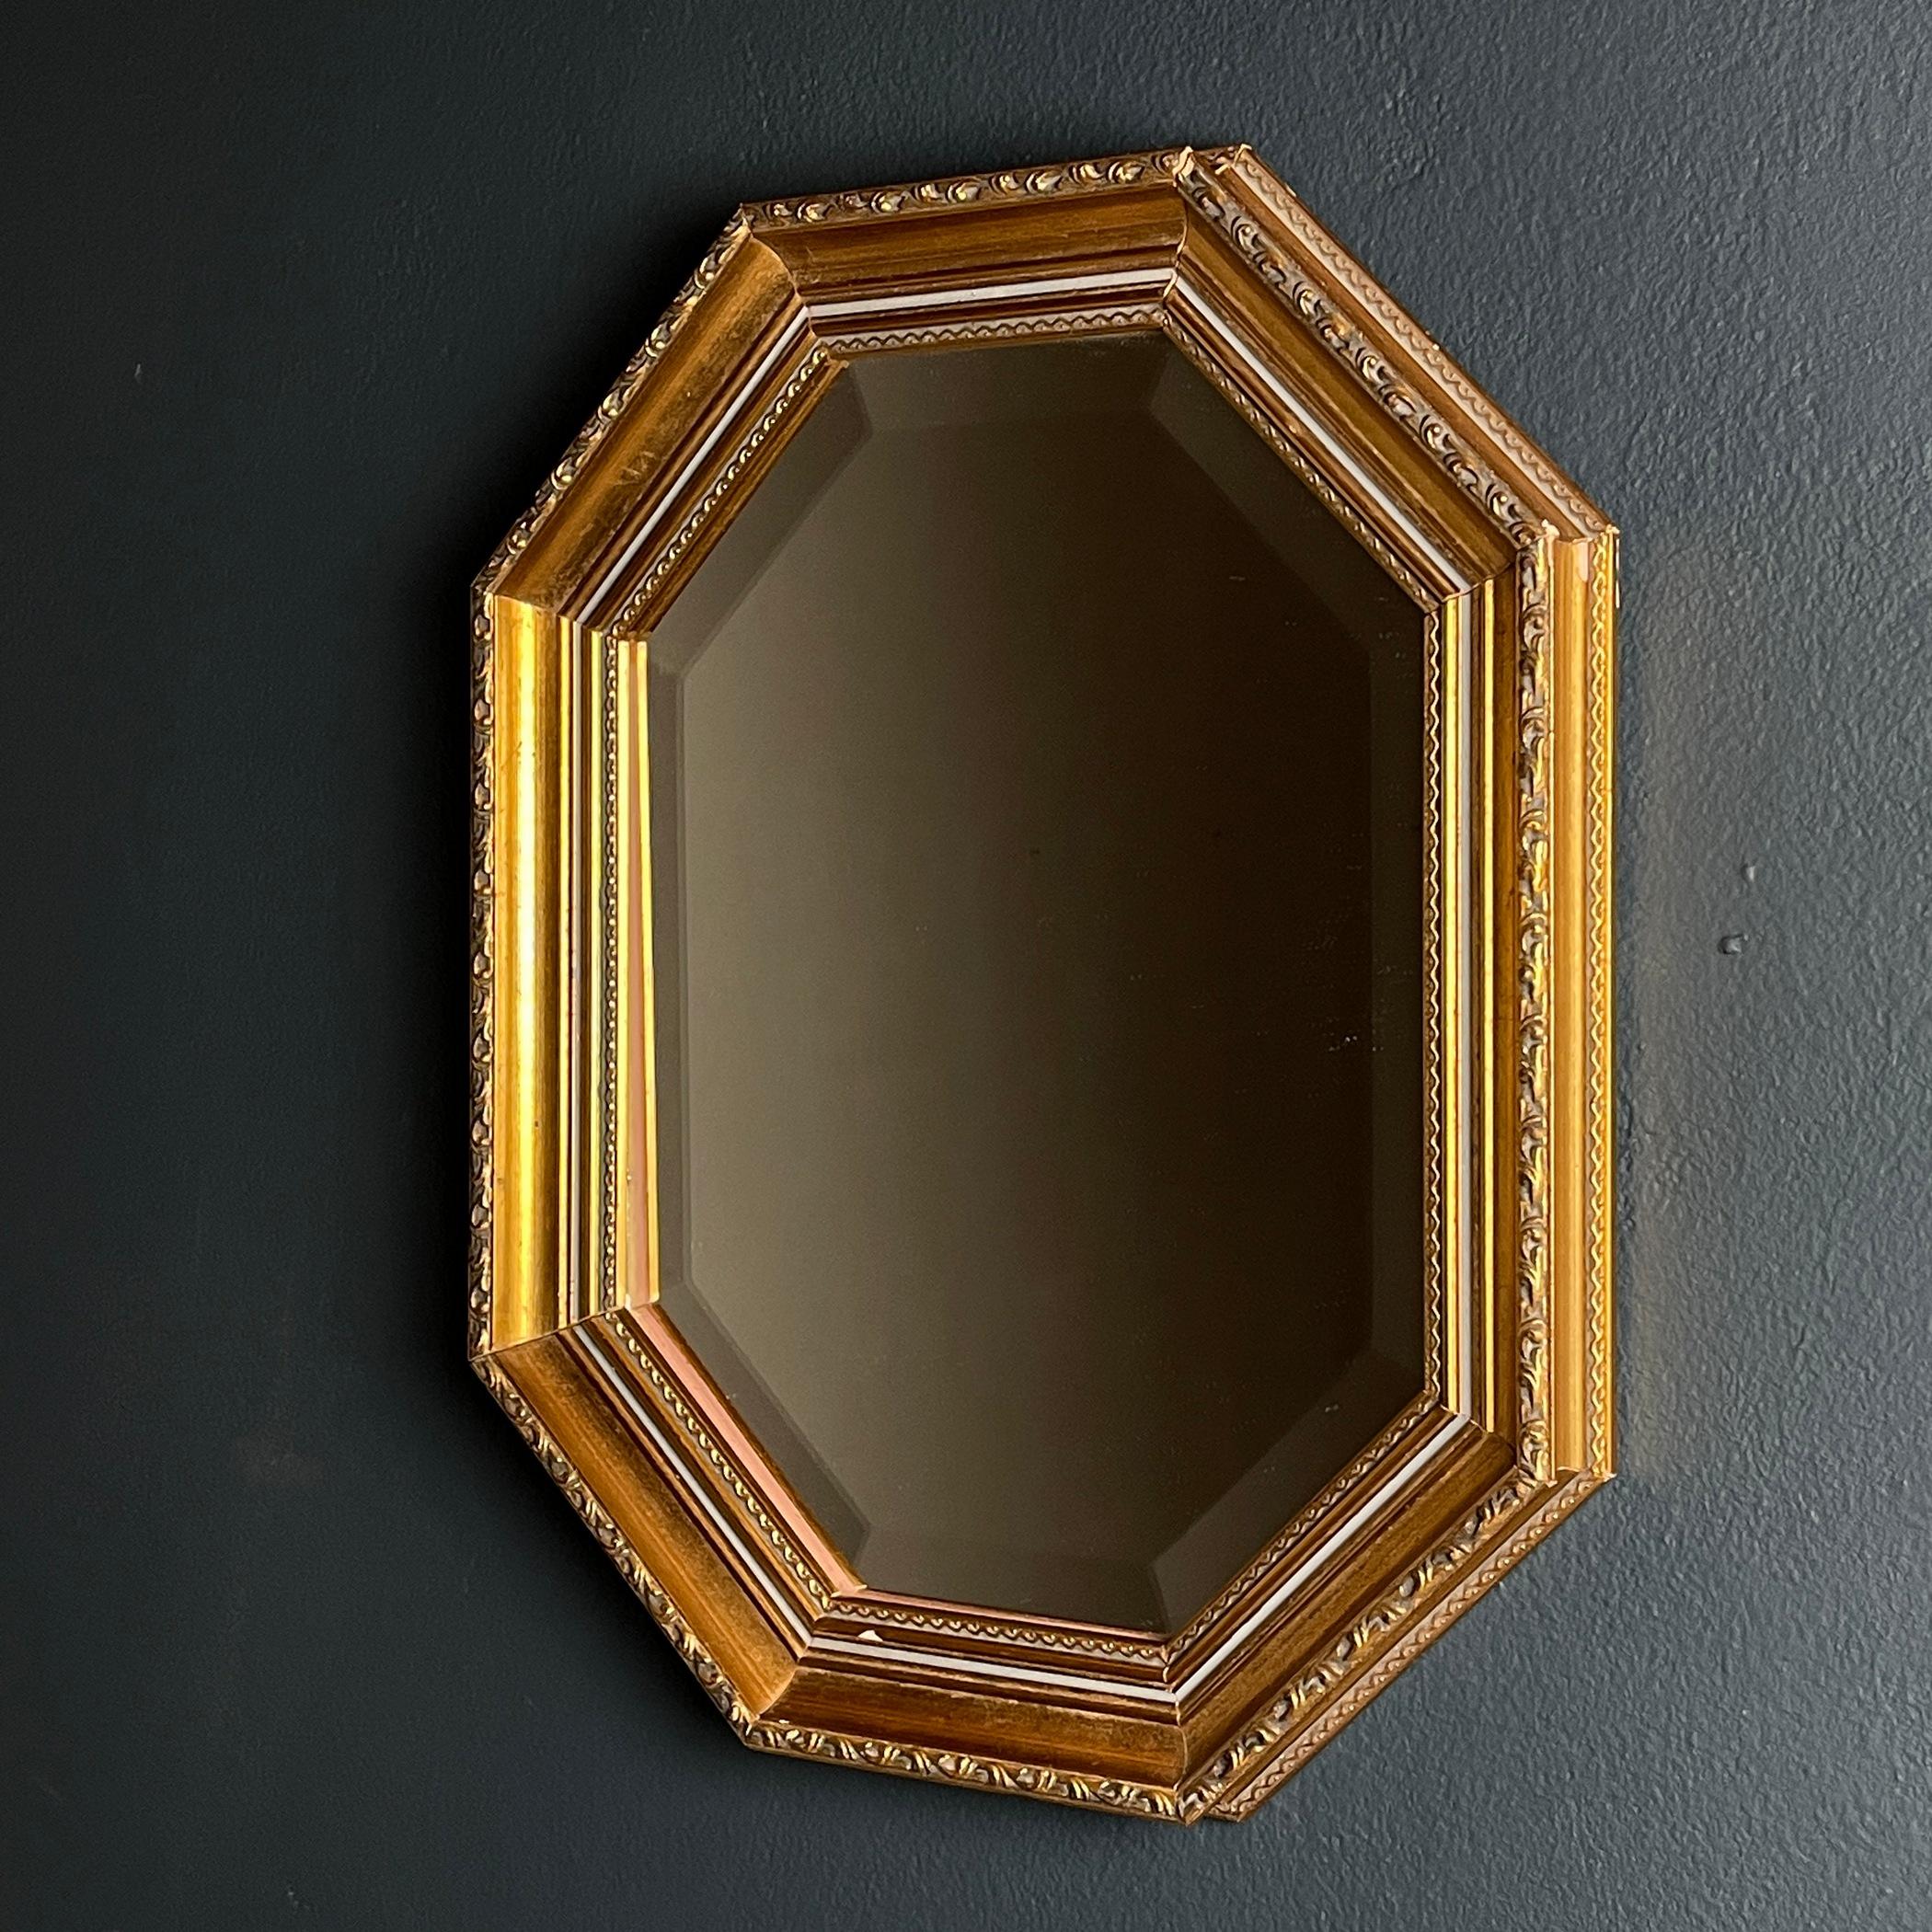 Behold a vintage mirror encased in an octagonal wooden frame adorned with a lustrous gold finish. This wall-mounted piece, a product of Italian craftsmanship dating back to the 1940s-1950s, exudes a timeless allure. The gilded wooden frame not only